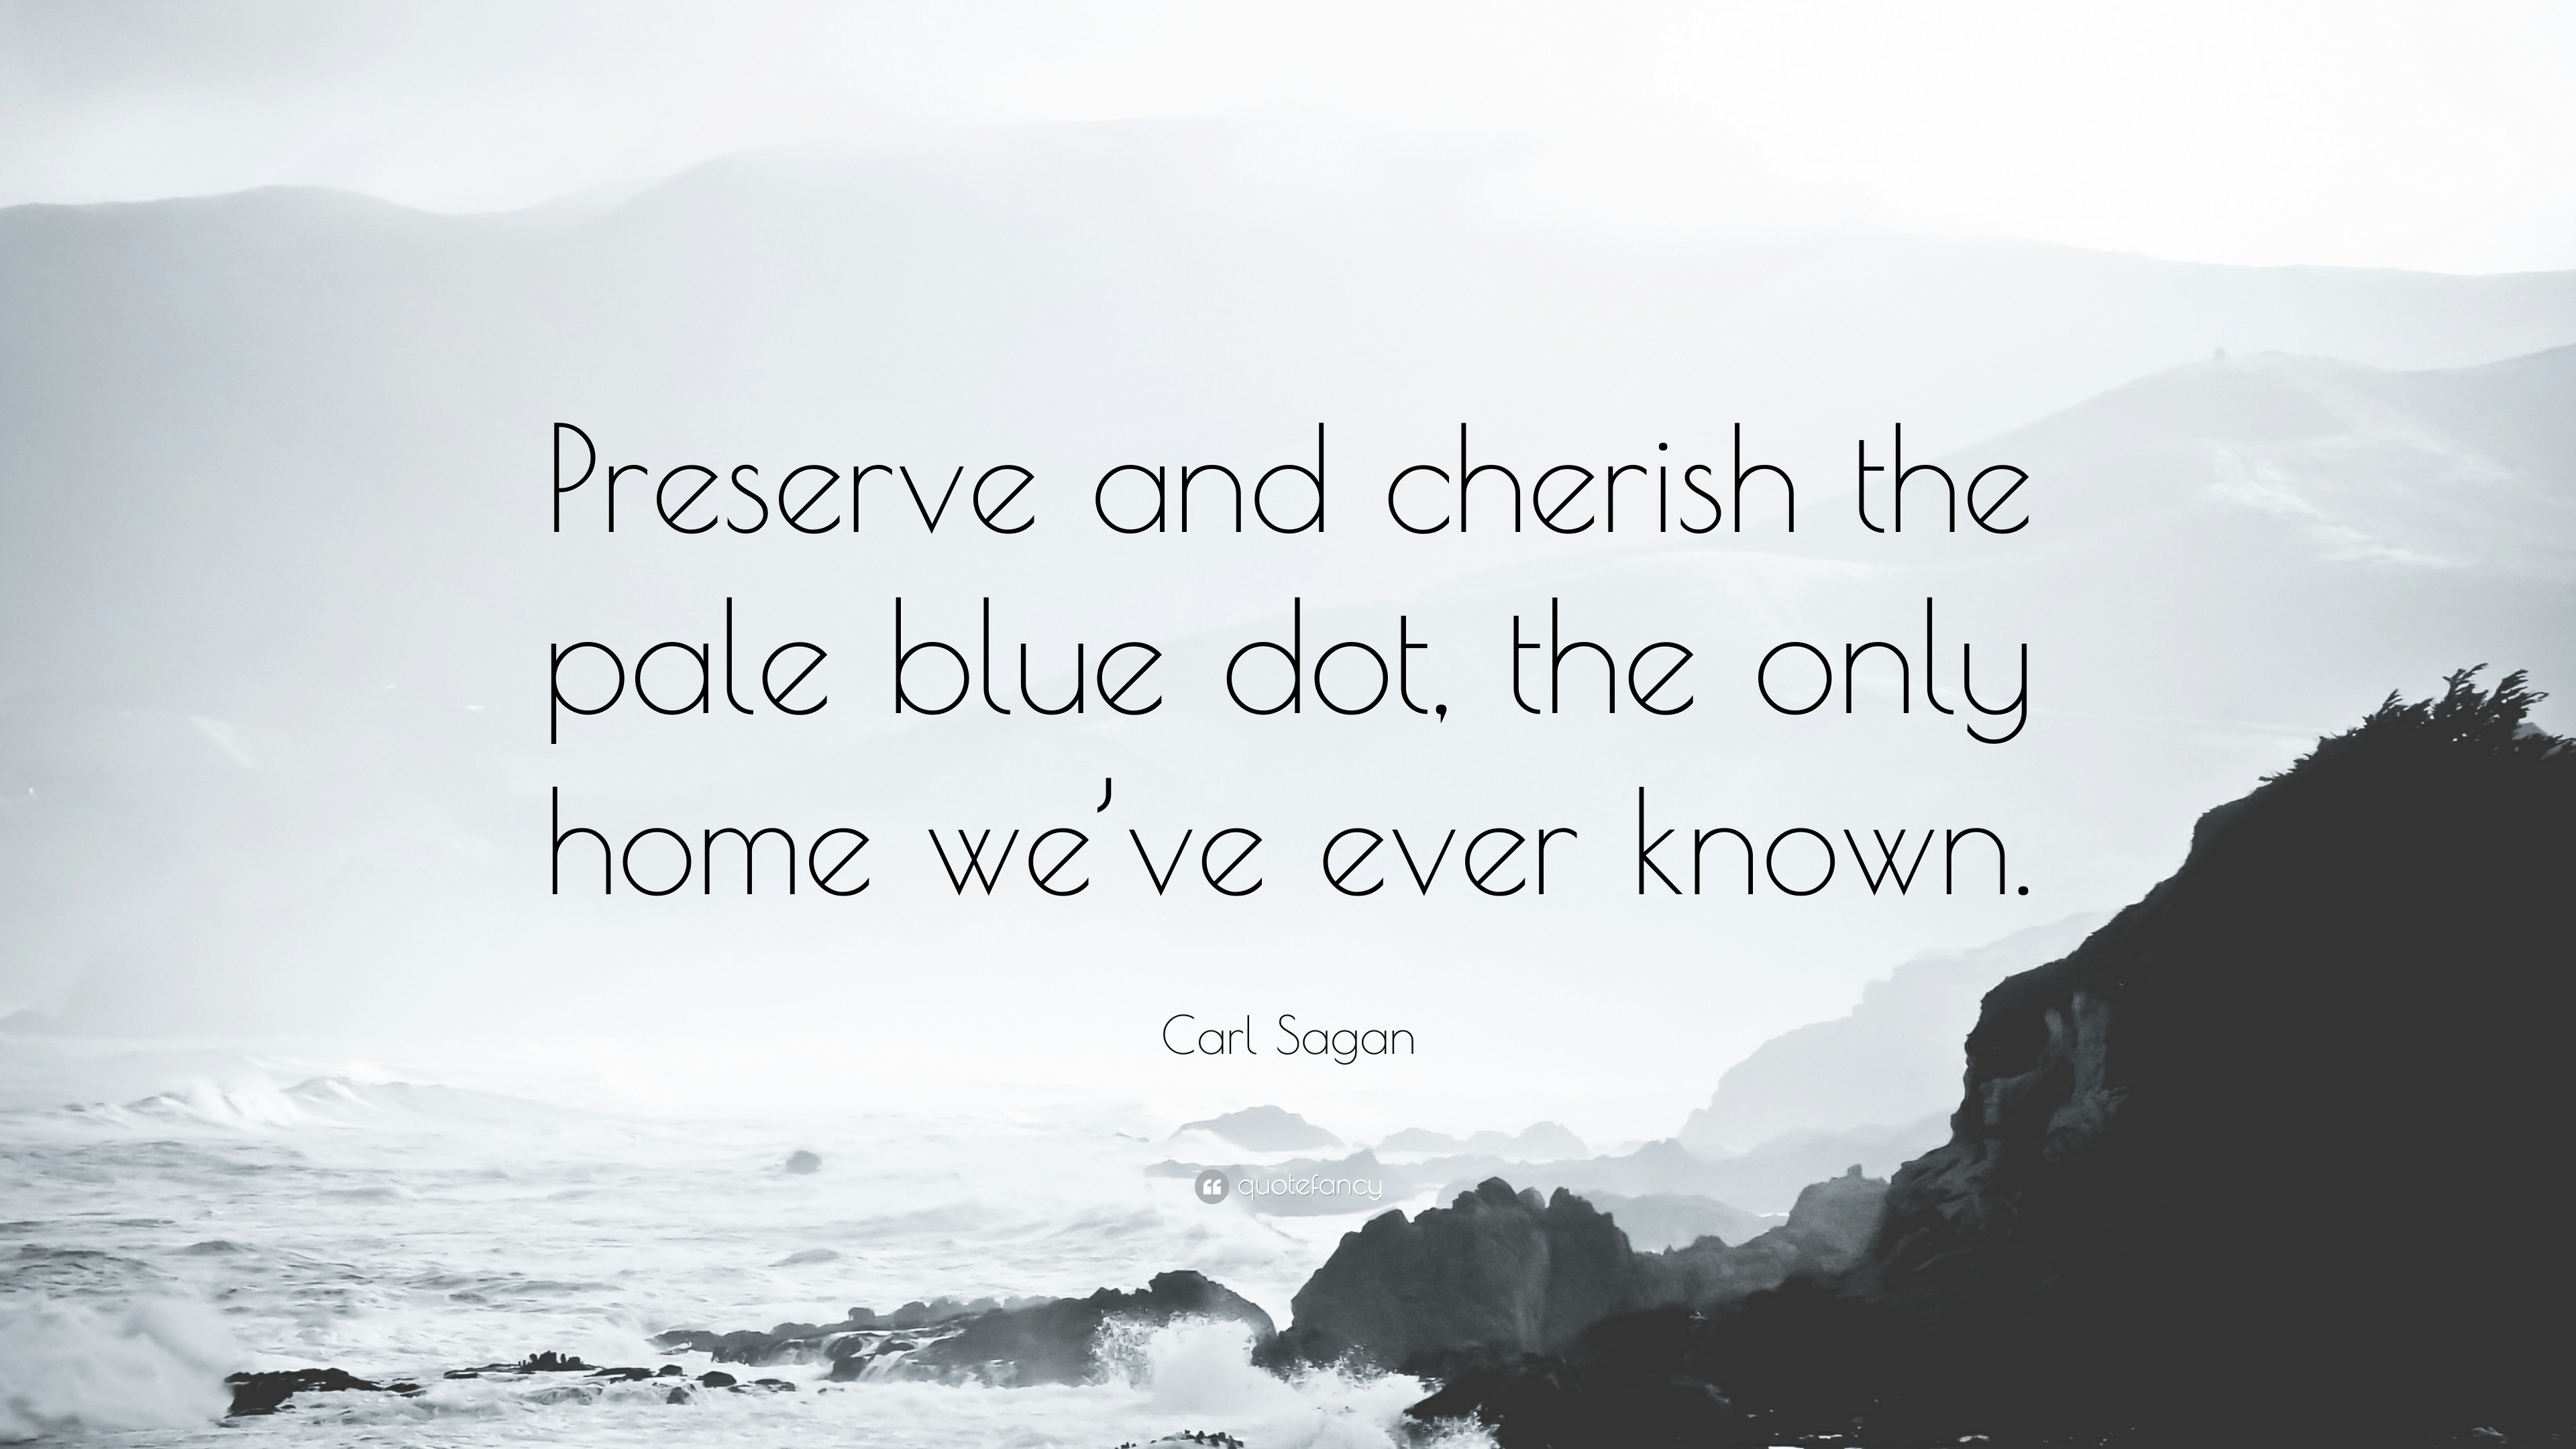 3840x2160 Carl Sagan Quote: “Preserve and cherish the pale blue dot, the only home